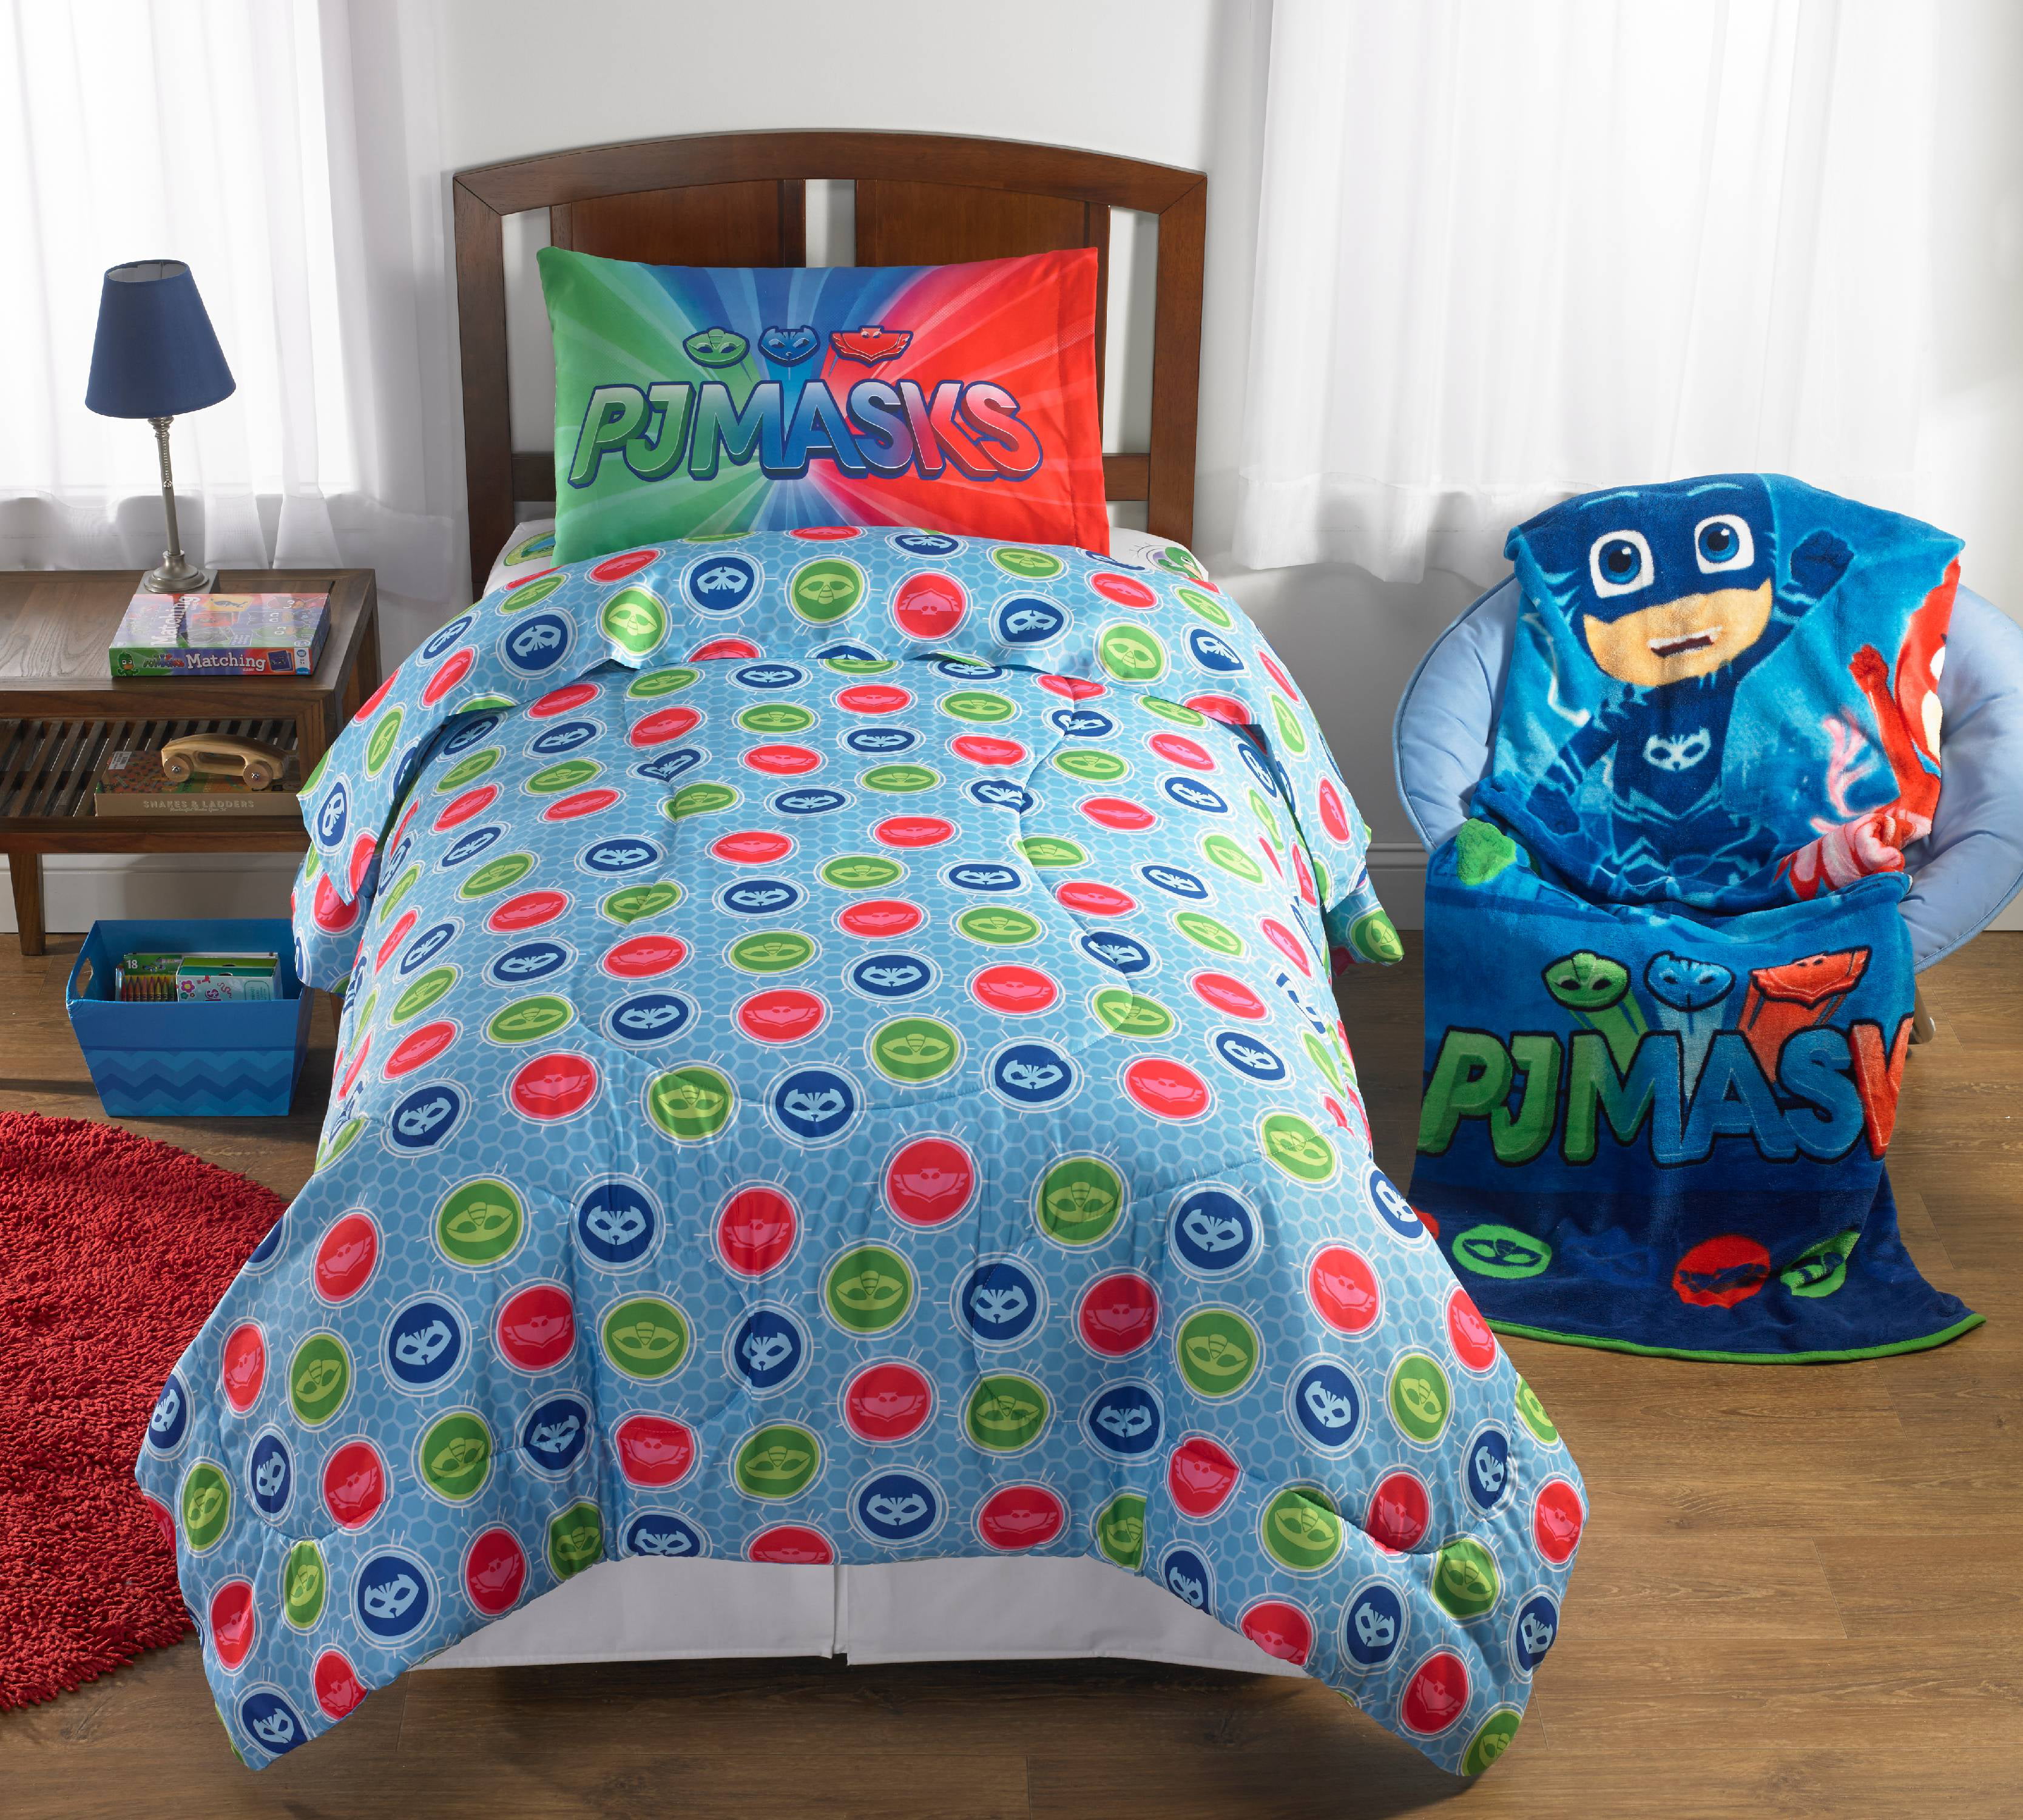 PJ Masks "On Our Way" 2 Piece Twin/Full Comforter with Sham 